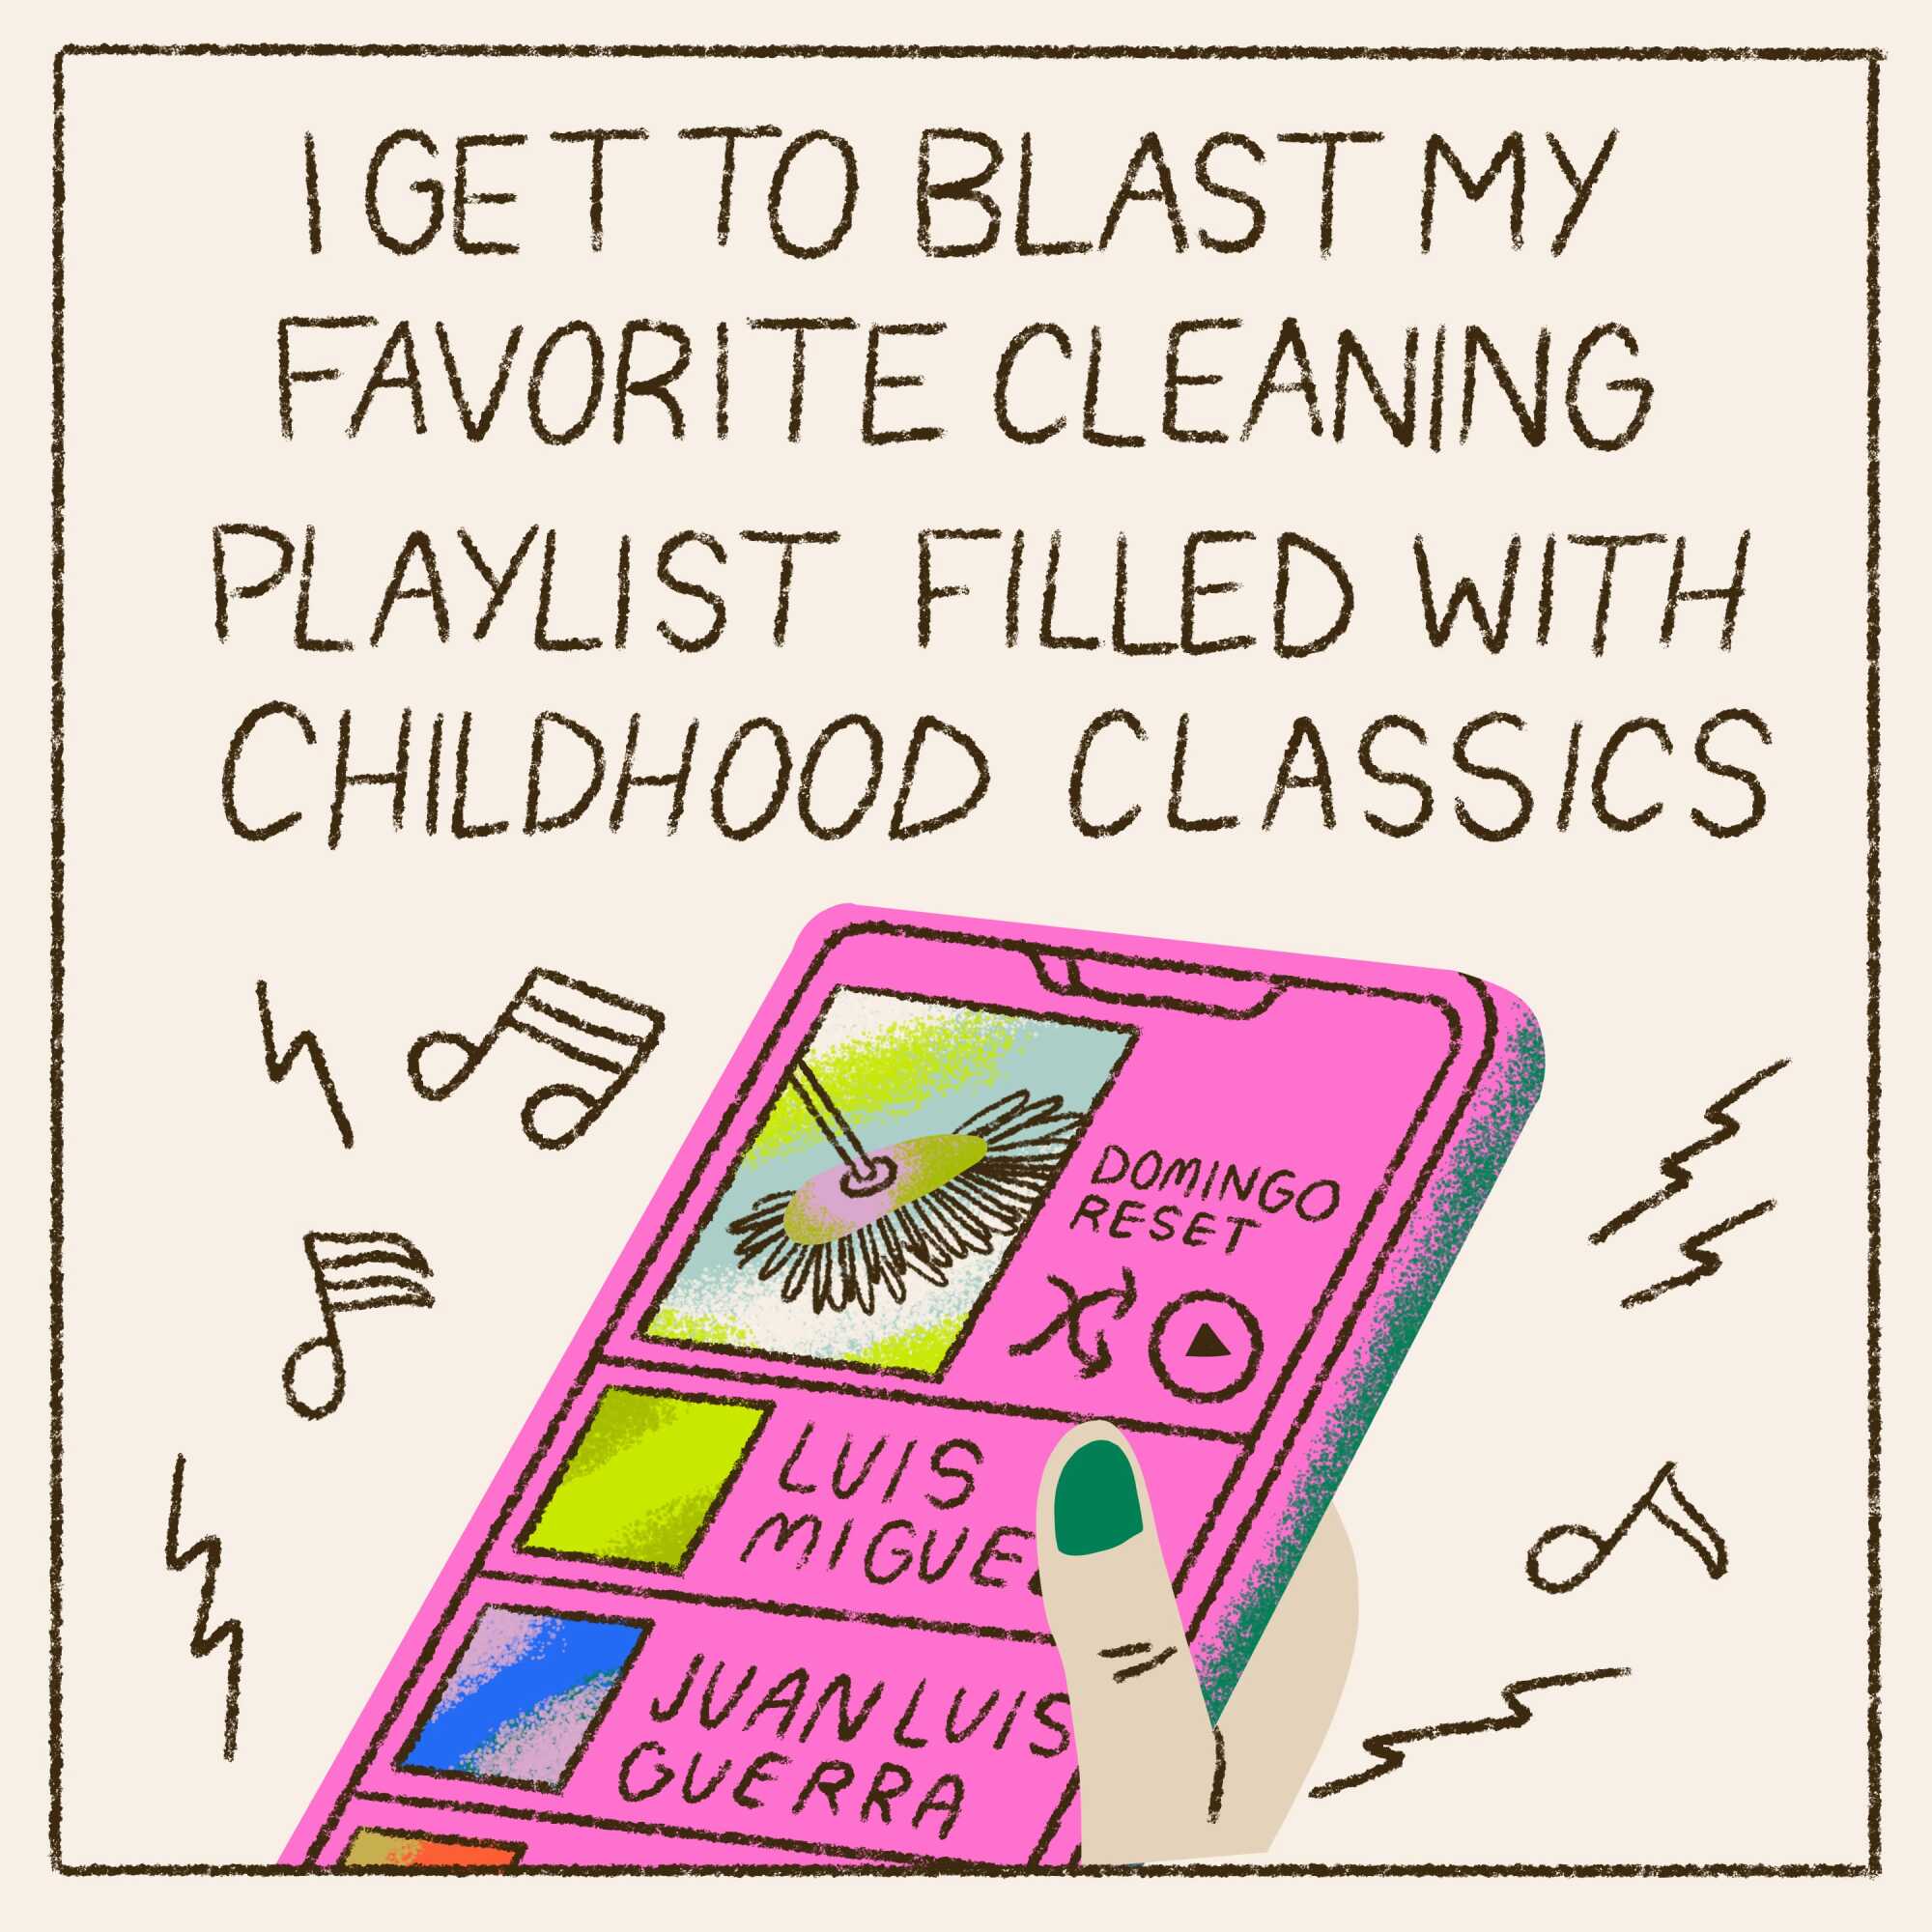 I get to blast my favorite cleaning playlist filled with childhood classics 